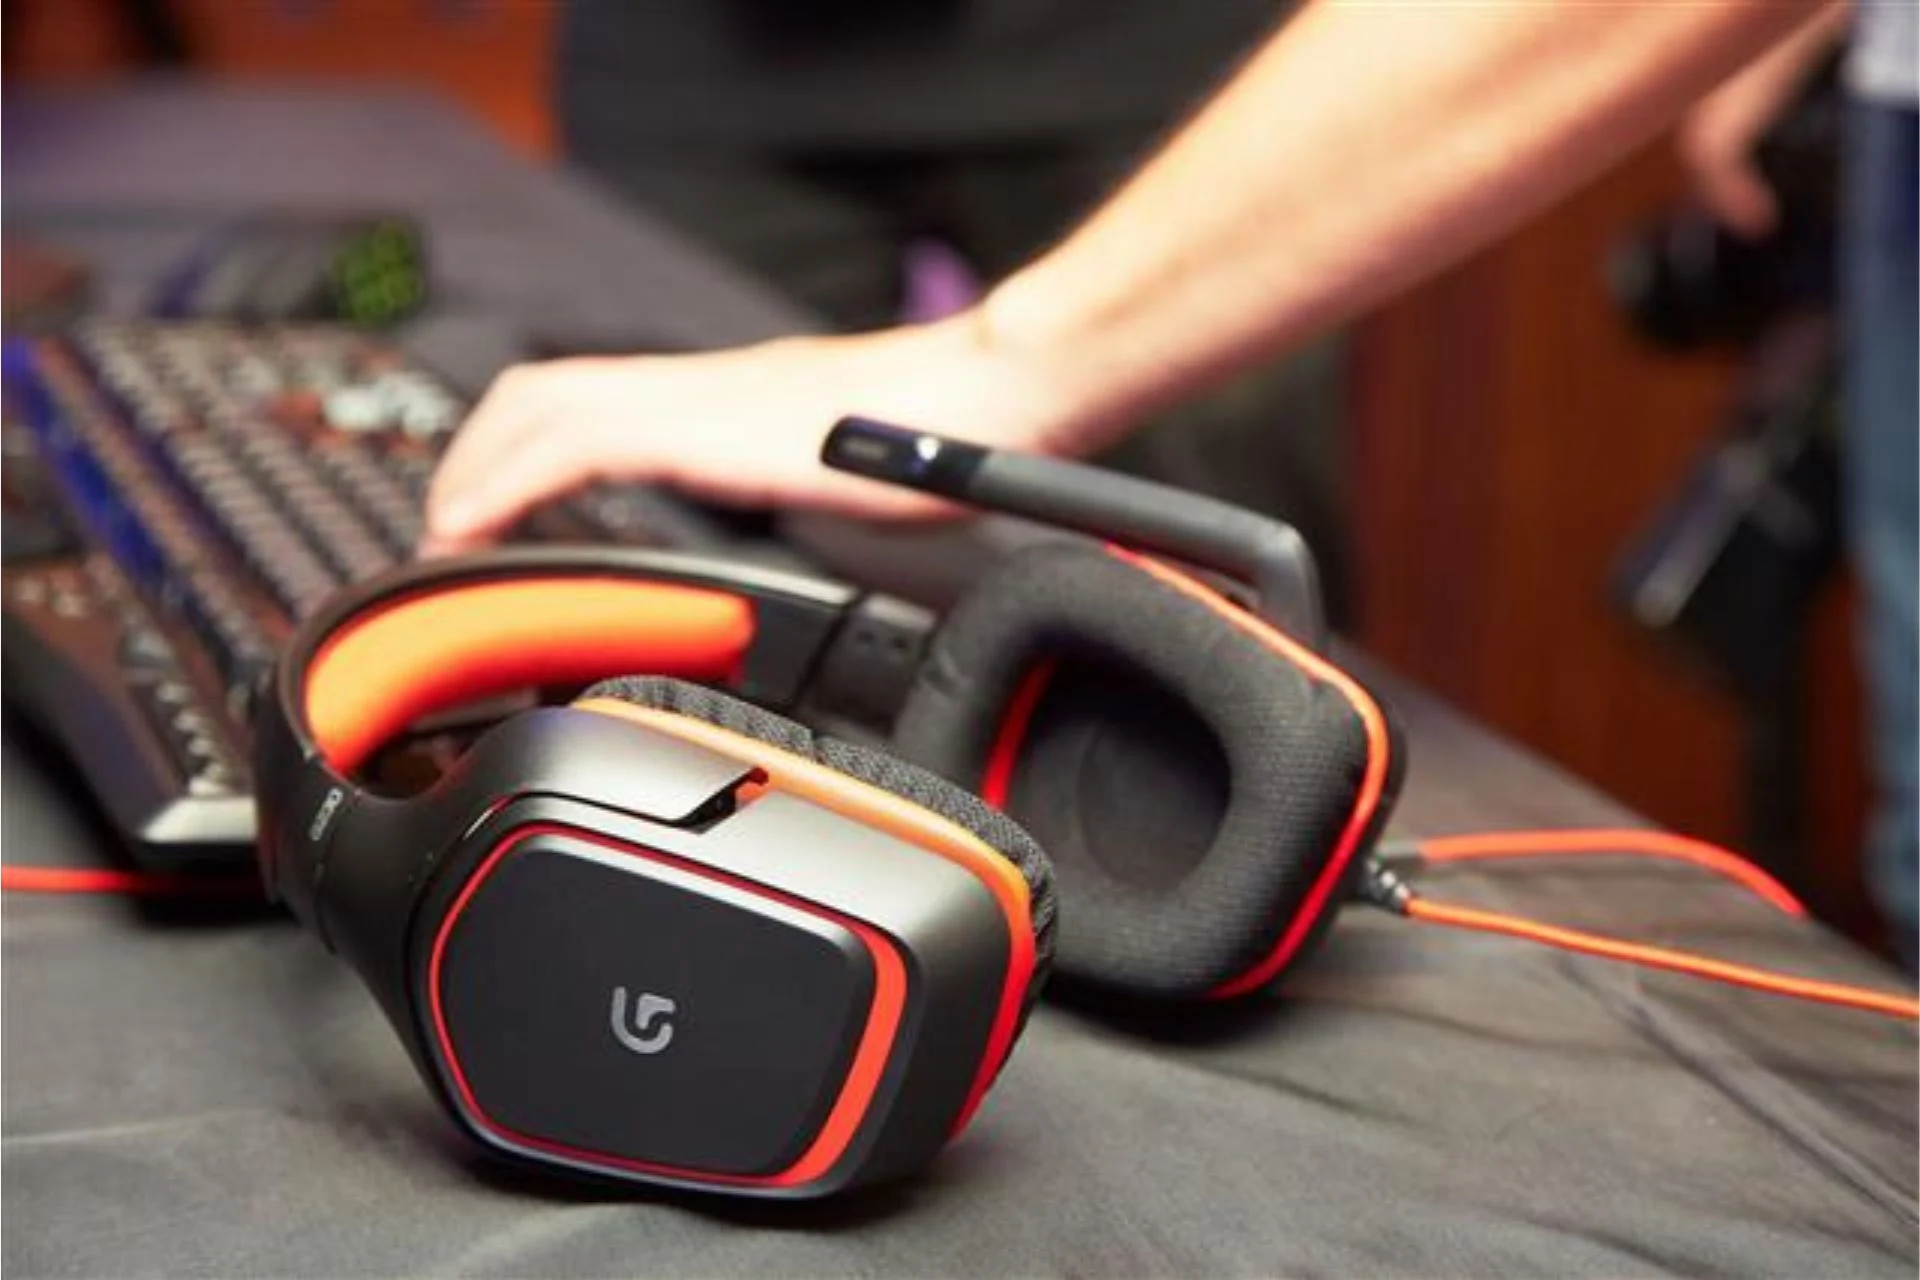 Logitech G230 Headset Maintenance: Cleaning Tips And Tricks